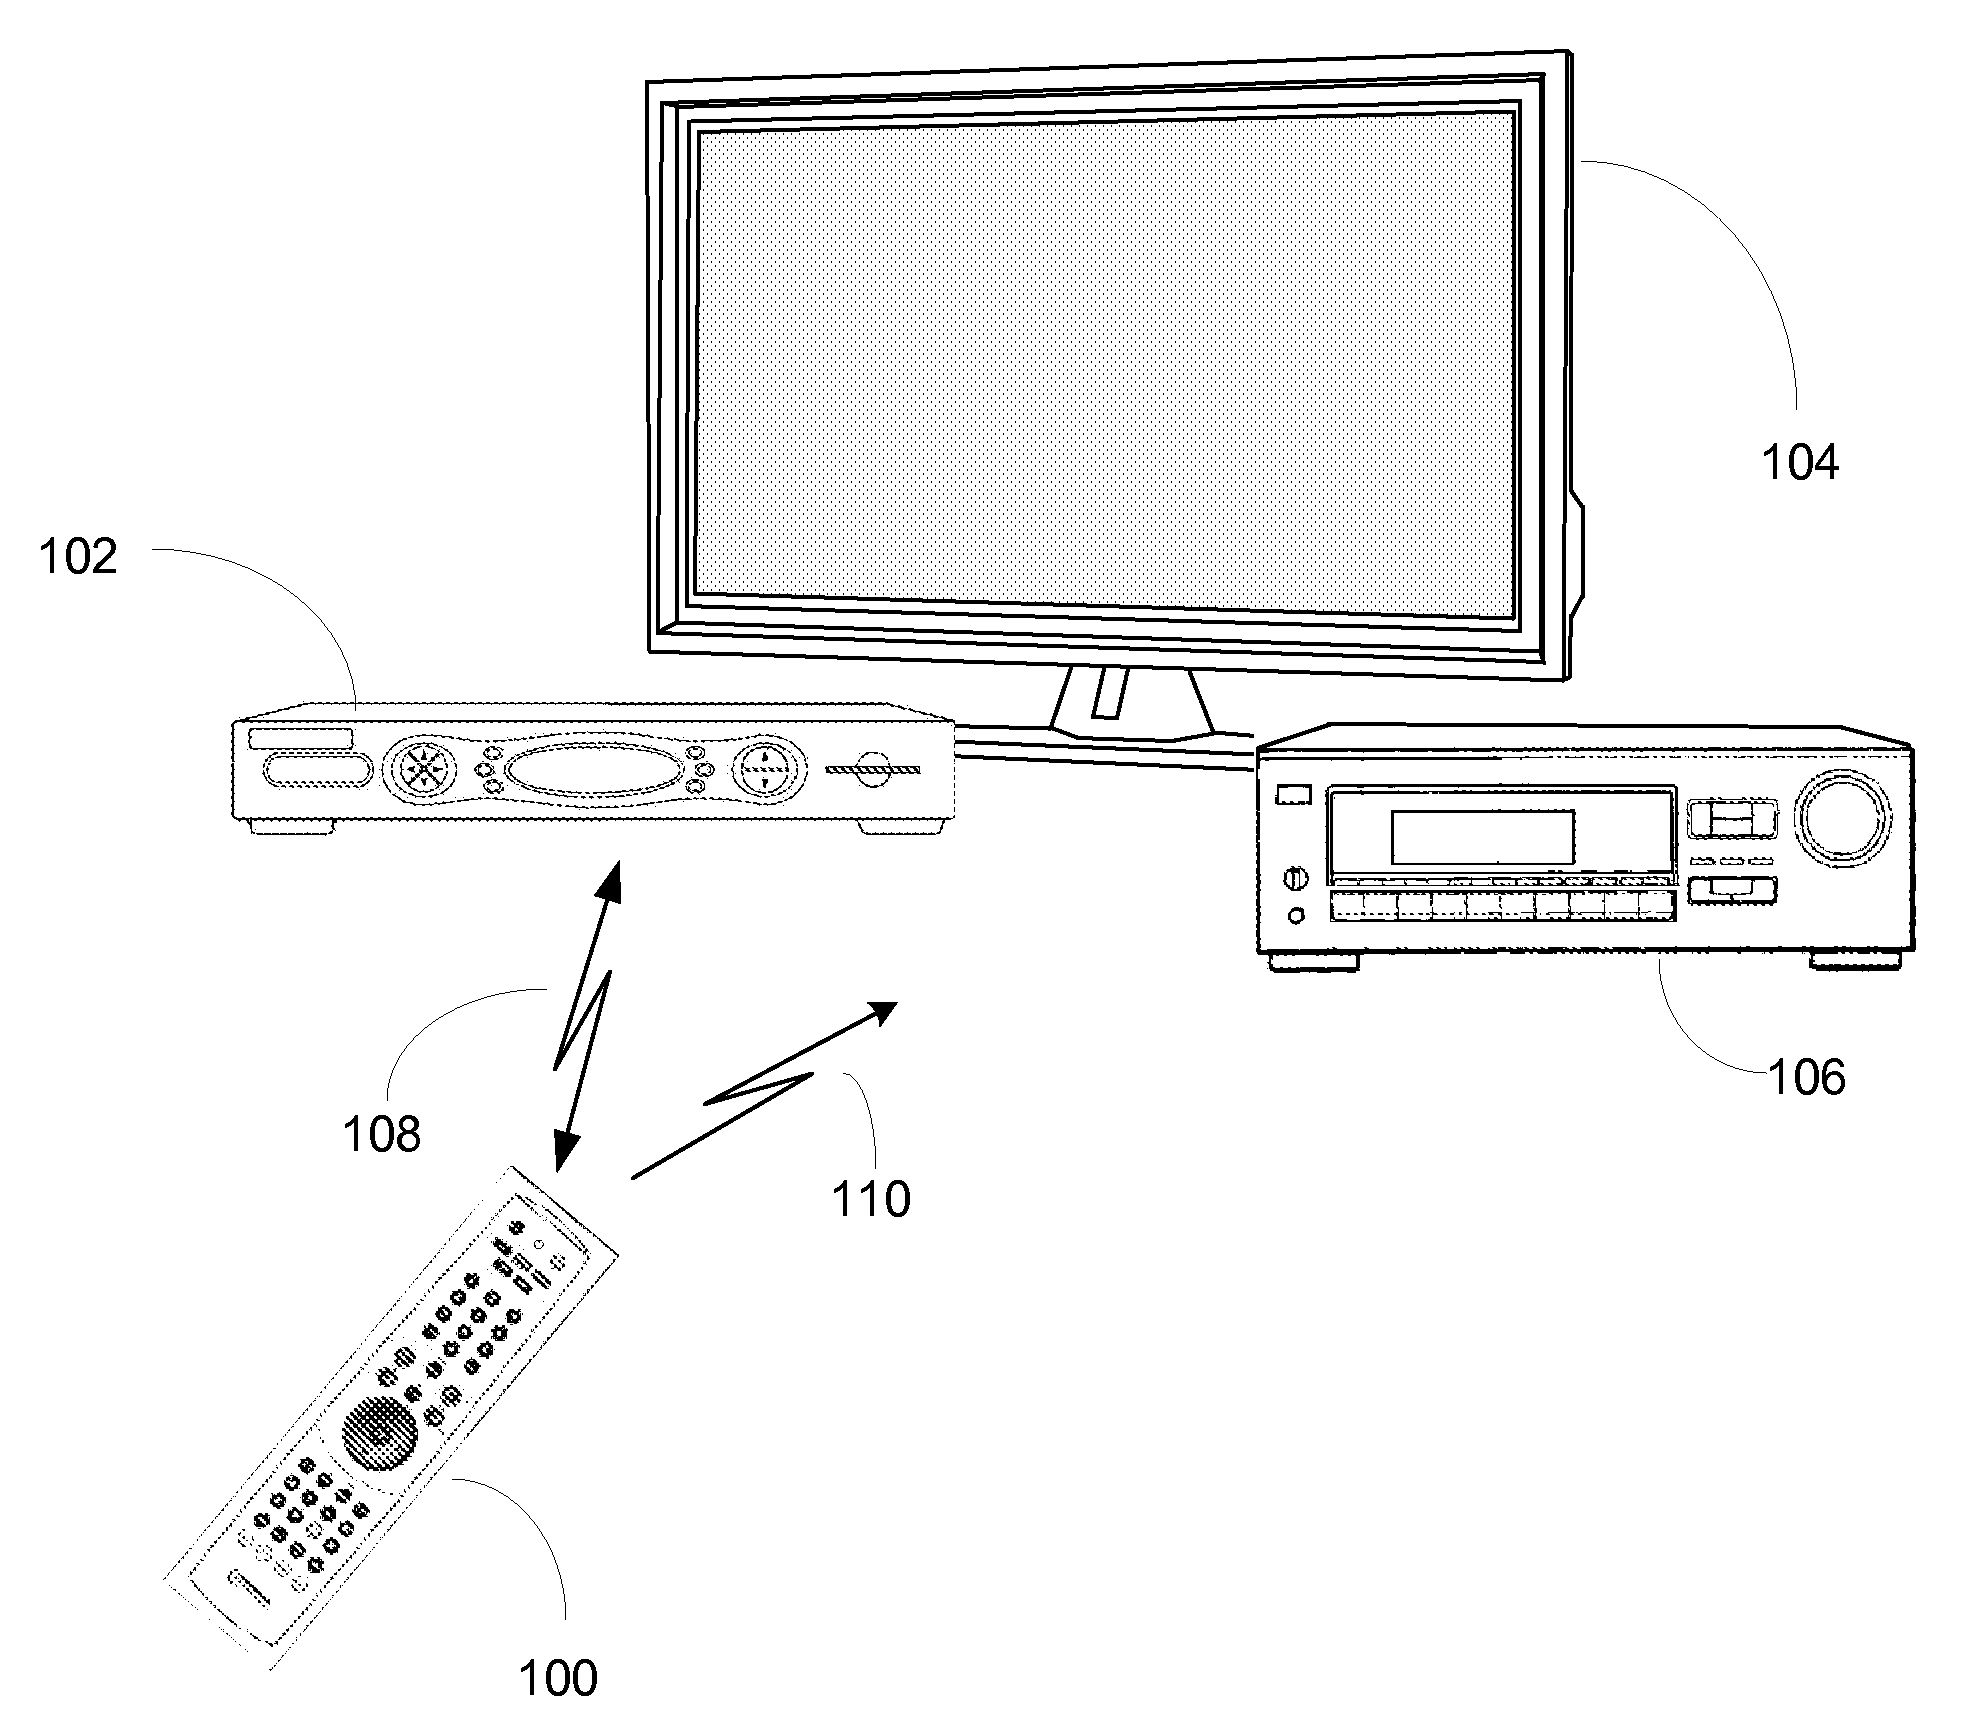 System and method for improved infrared communication between consumer appliances